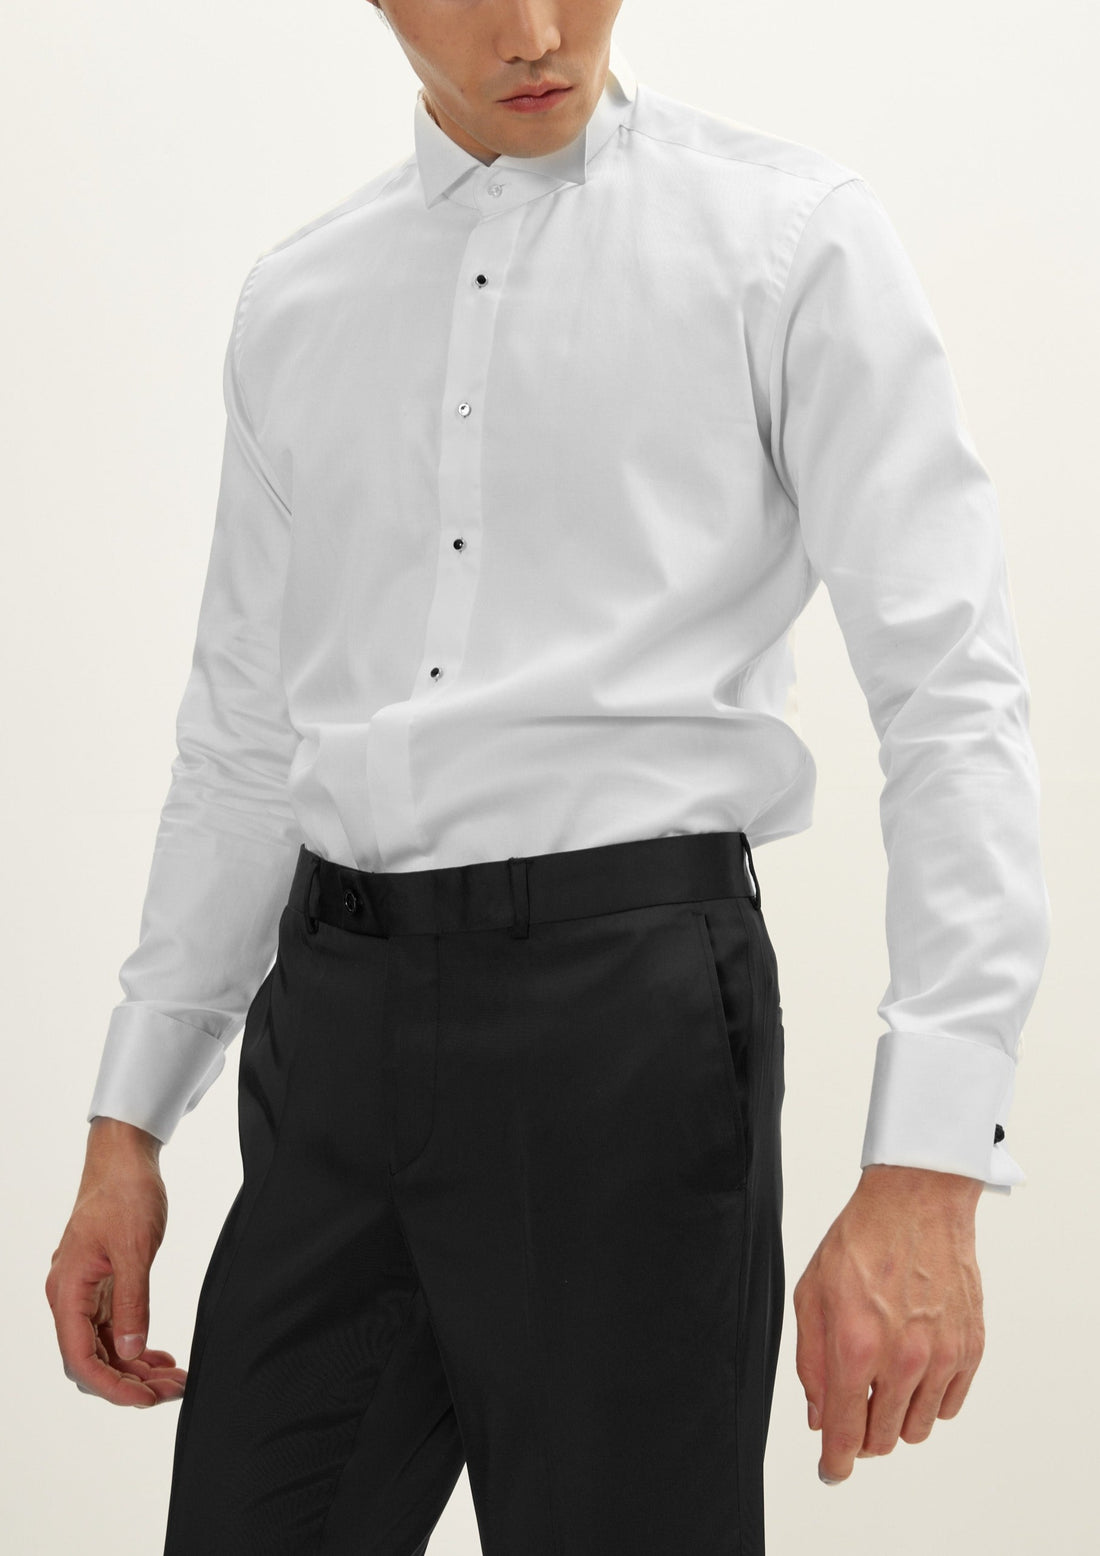 Wing Classical Top  Front Stud Tuxedo Shirt - White